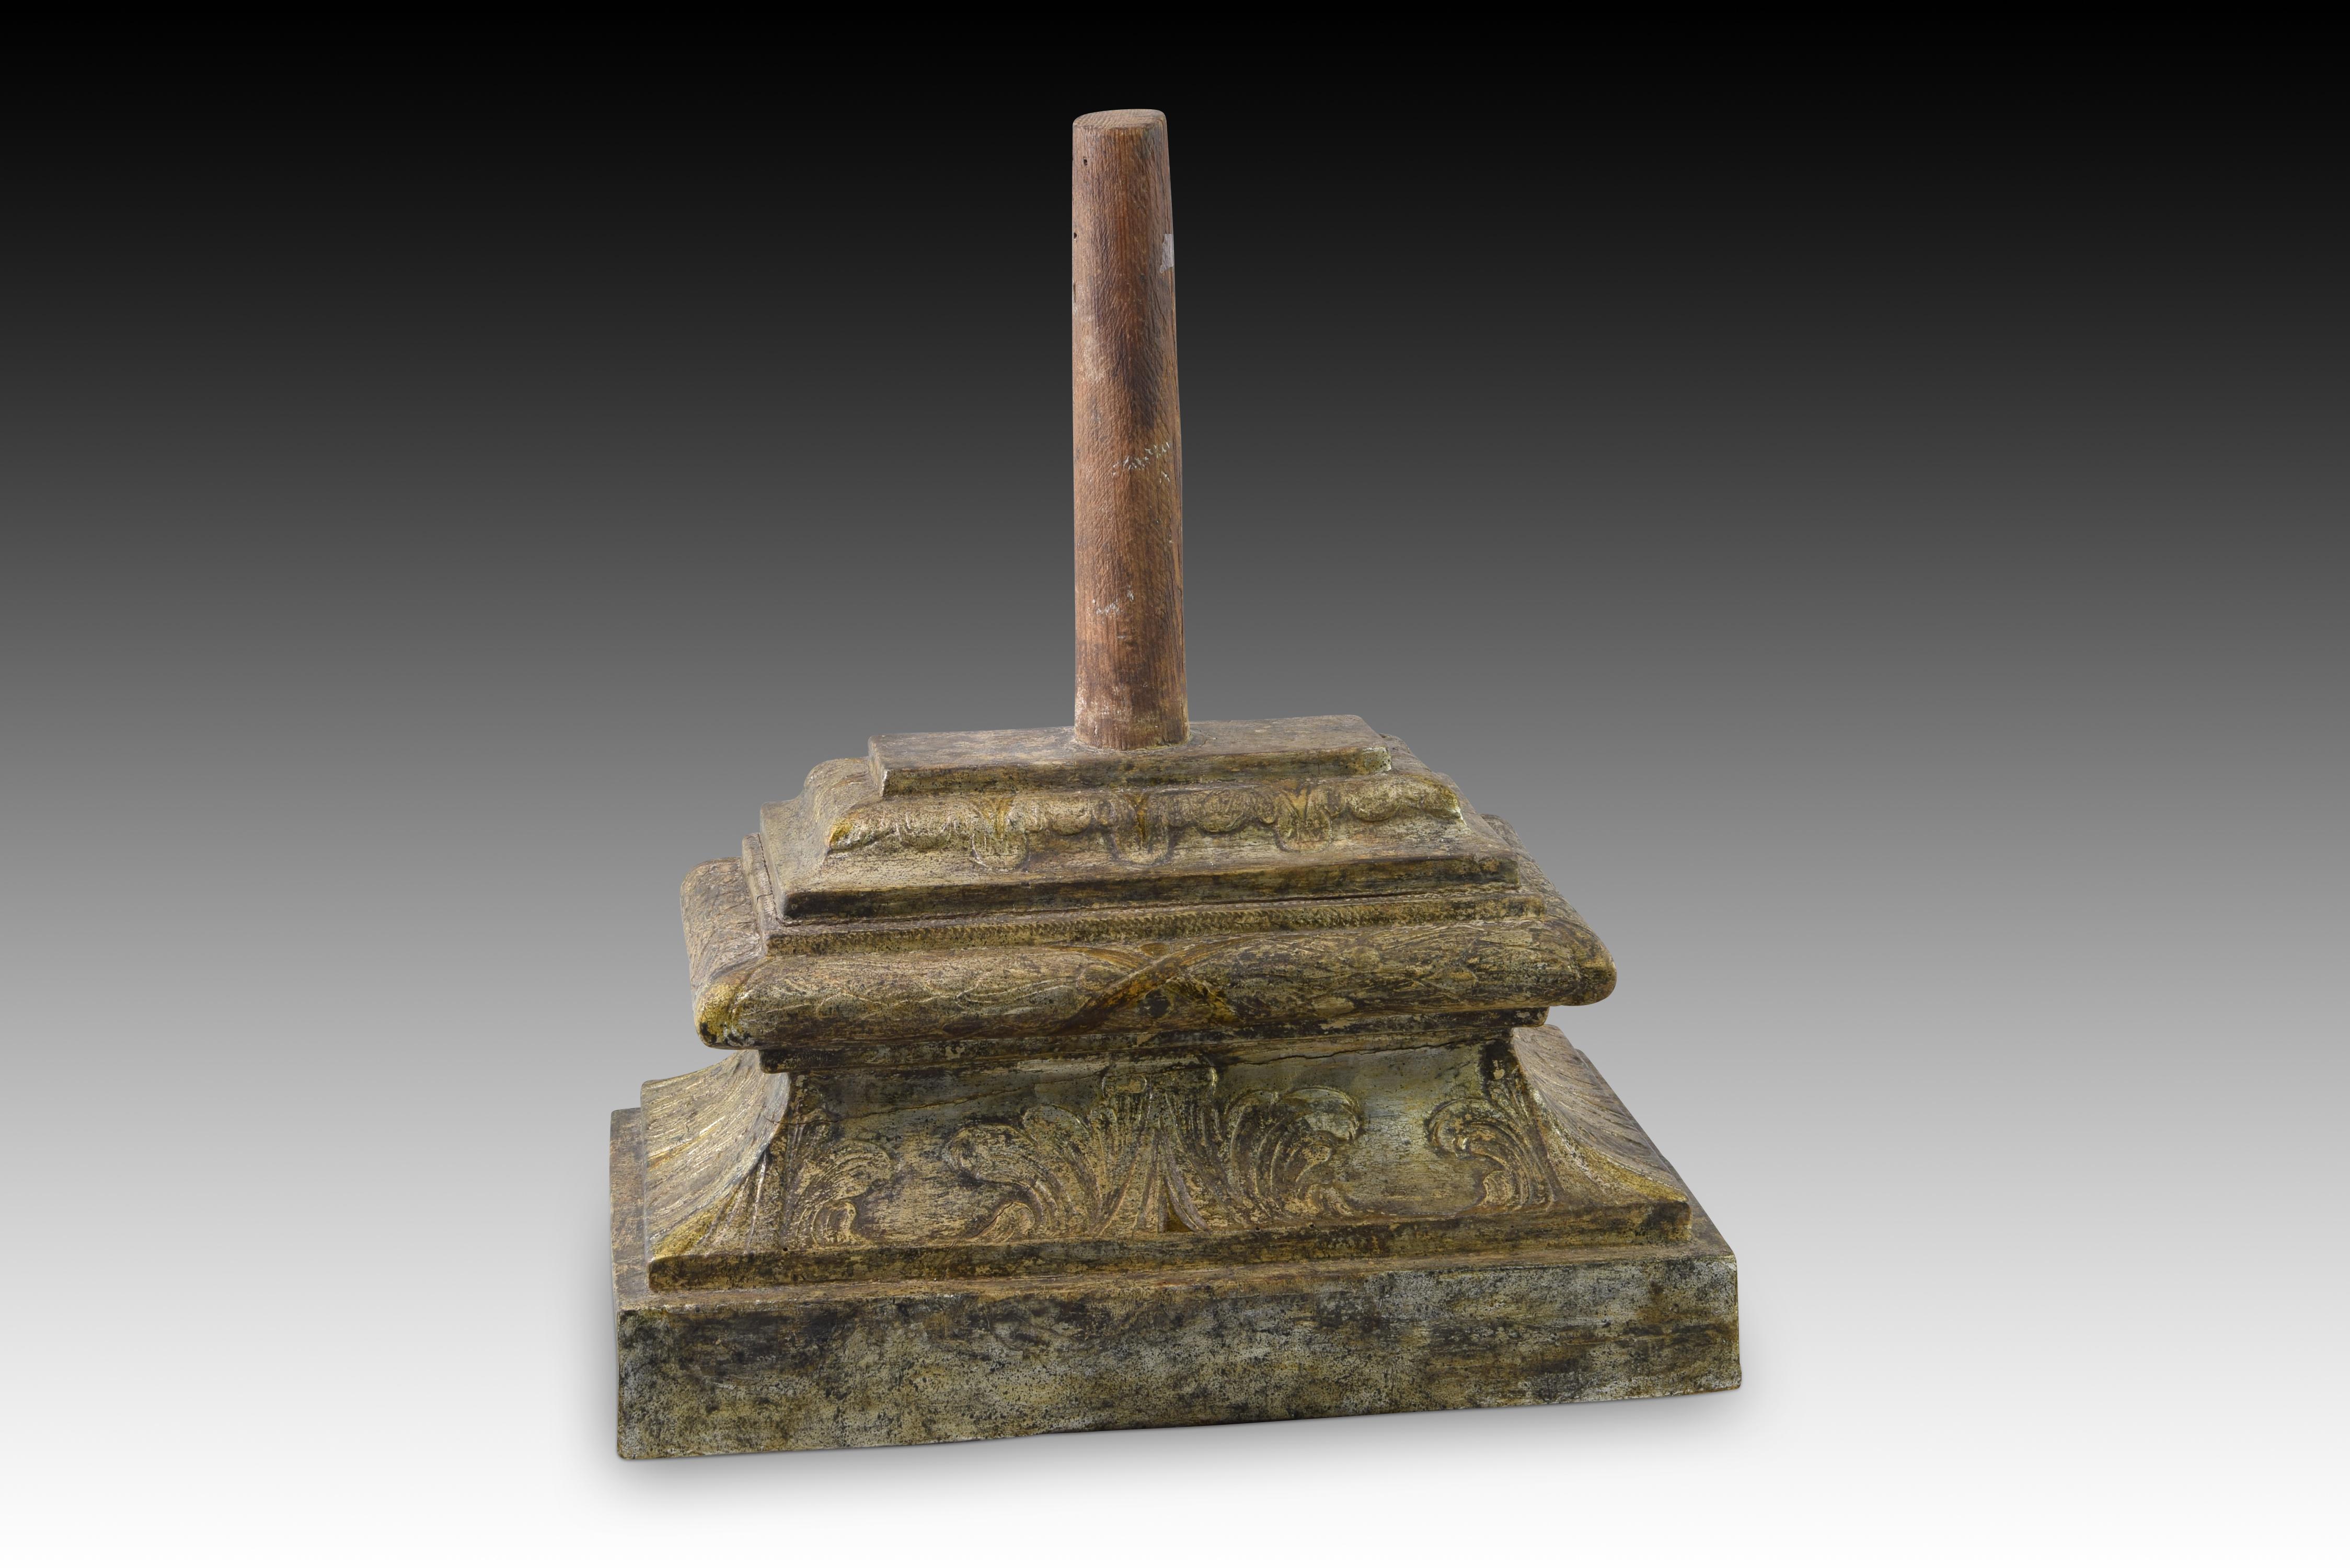 Base. Carved and polychrome wood. Spanish school, 17th century. 
Rectangular base base, made of carved and polychrome wood in gray tones, which has been decorated with a series of moldings and bulls, some smooth and others enhanced with a fine